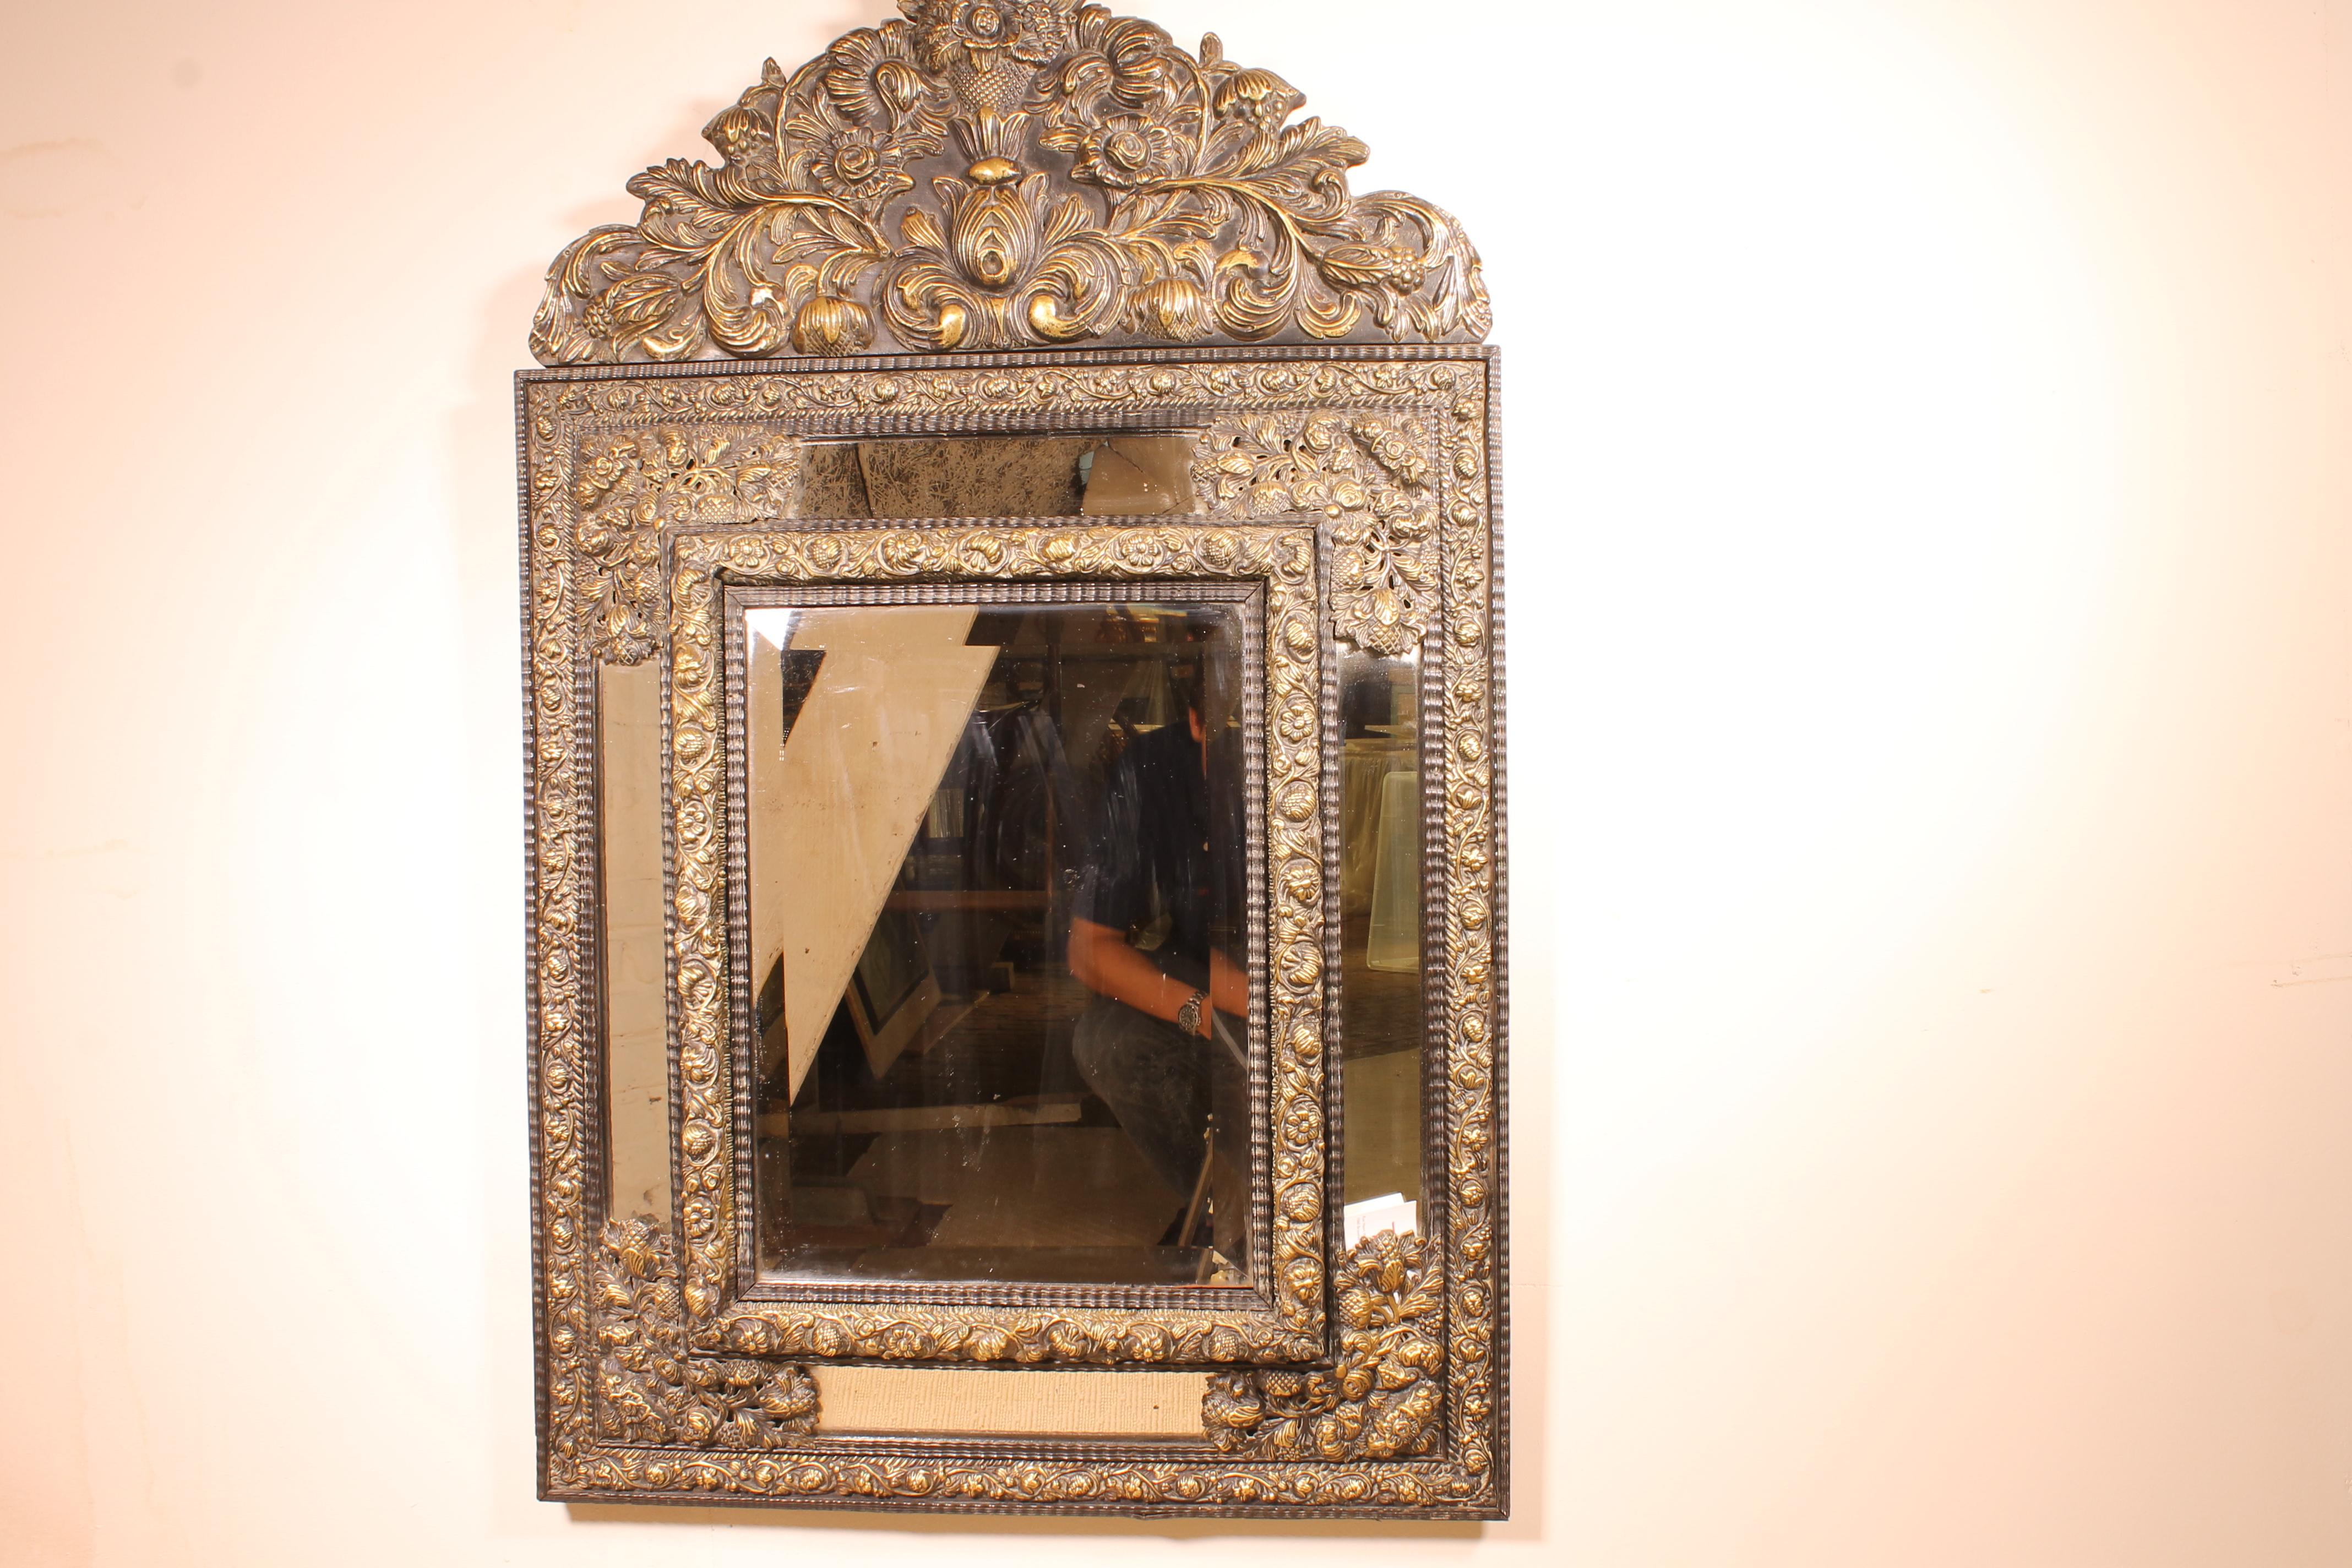 Beautiful mirror from the Netherlands of the 19th century in brass
The mirror is richly garnished with brass motifs decorated with a vase of flowers, flowers and leaves.
Nice mirror of beautiful proportions and in perfect condition.